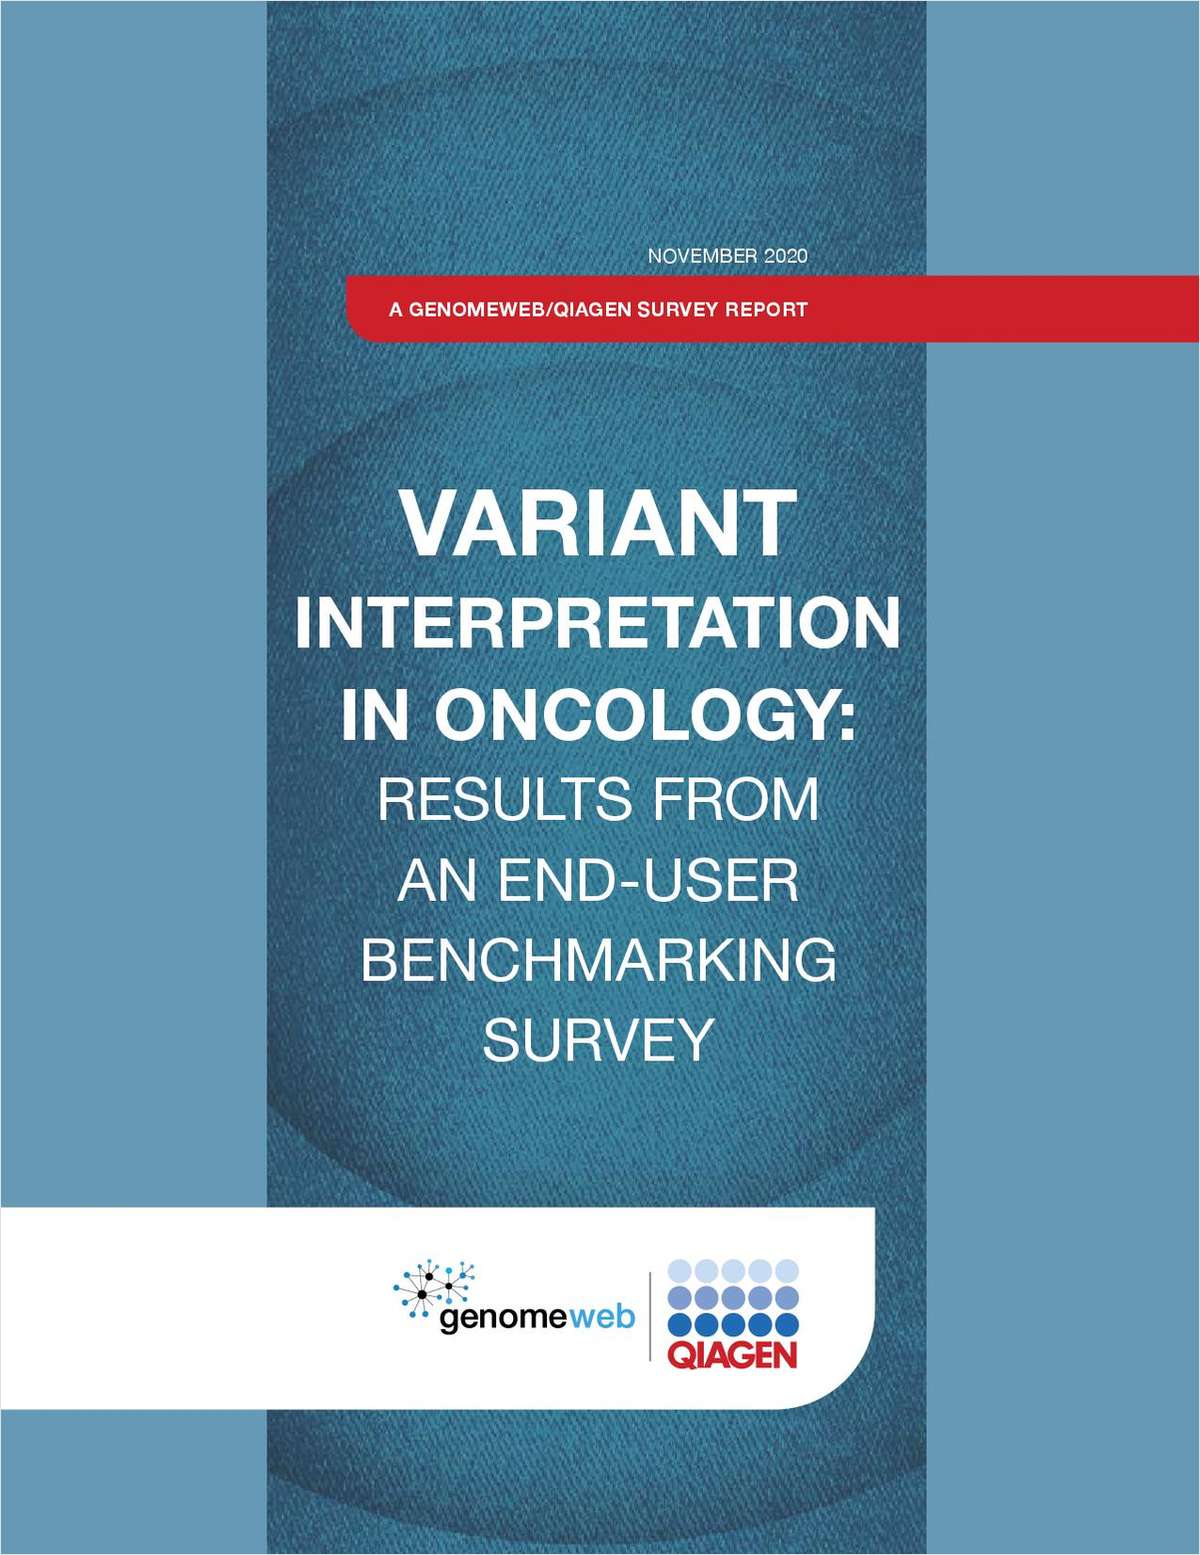 Variant Interpretation in Oncology: Results From an End-User Benchmarking Survey